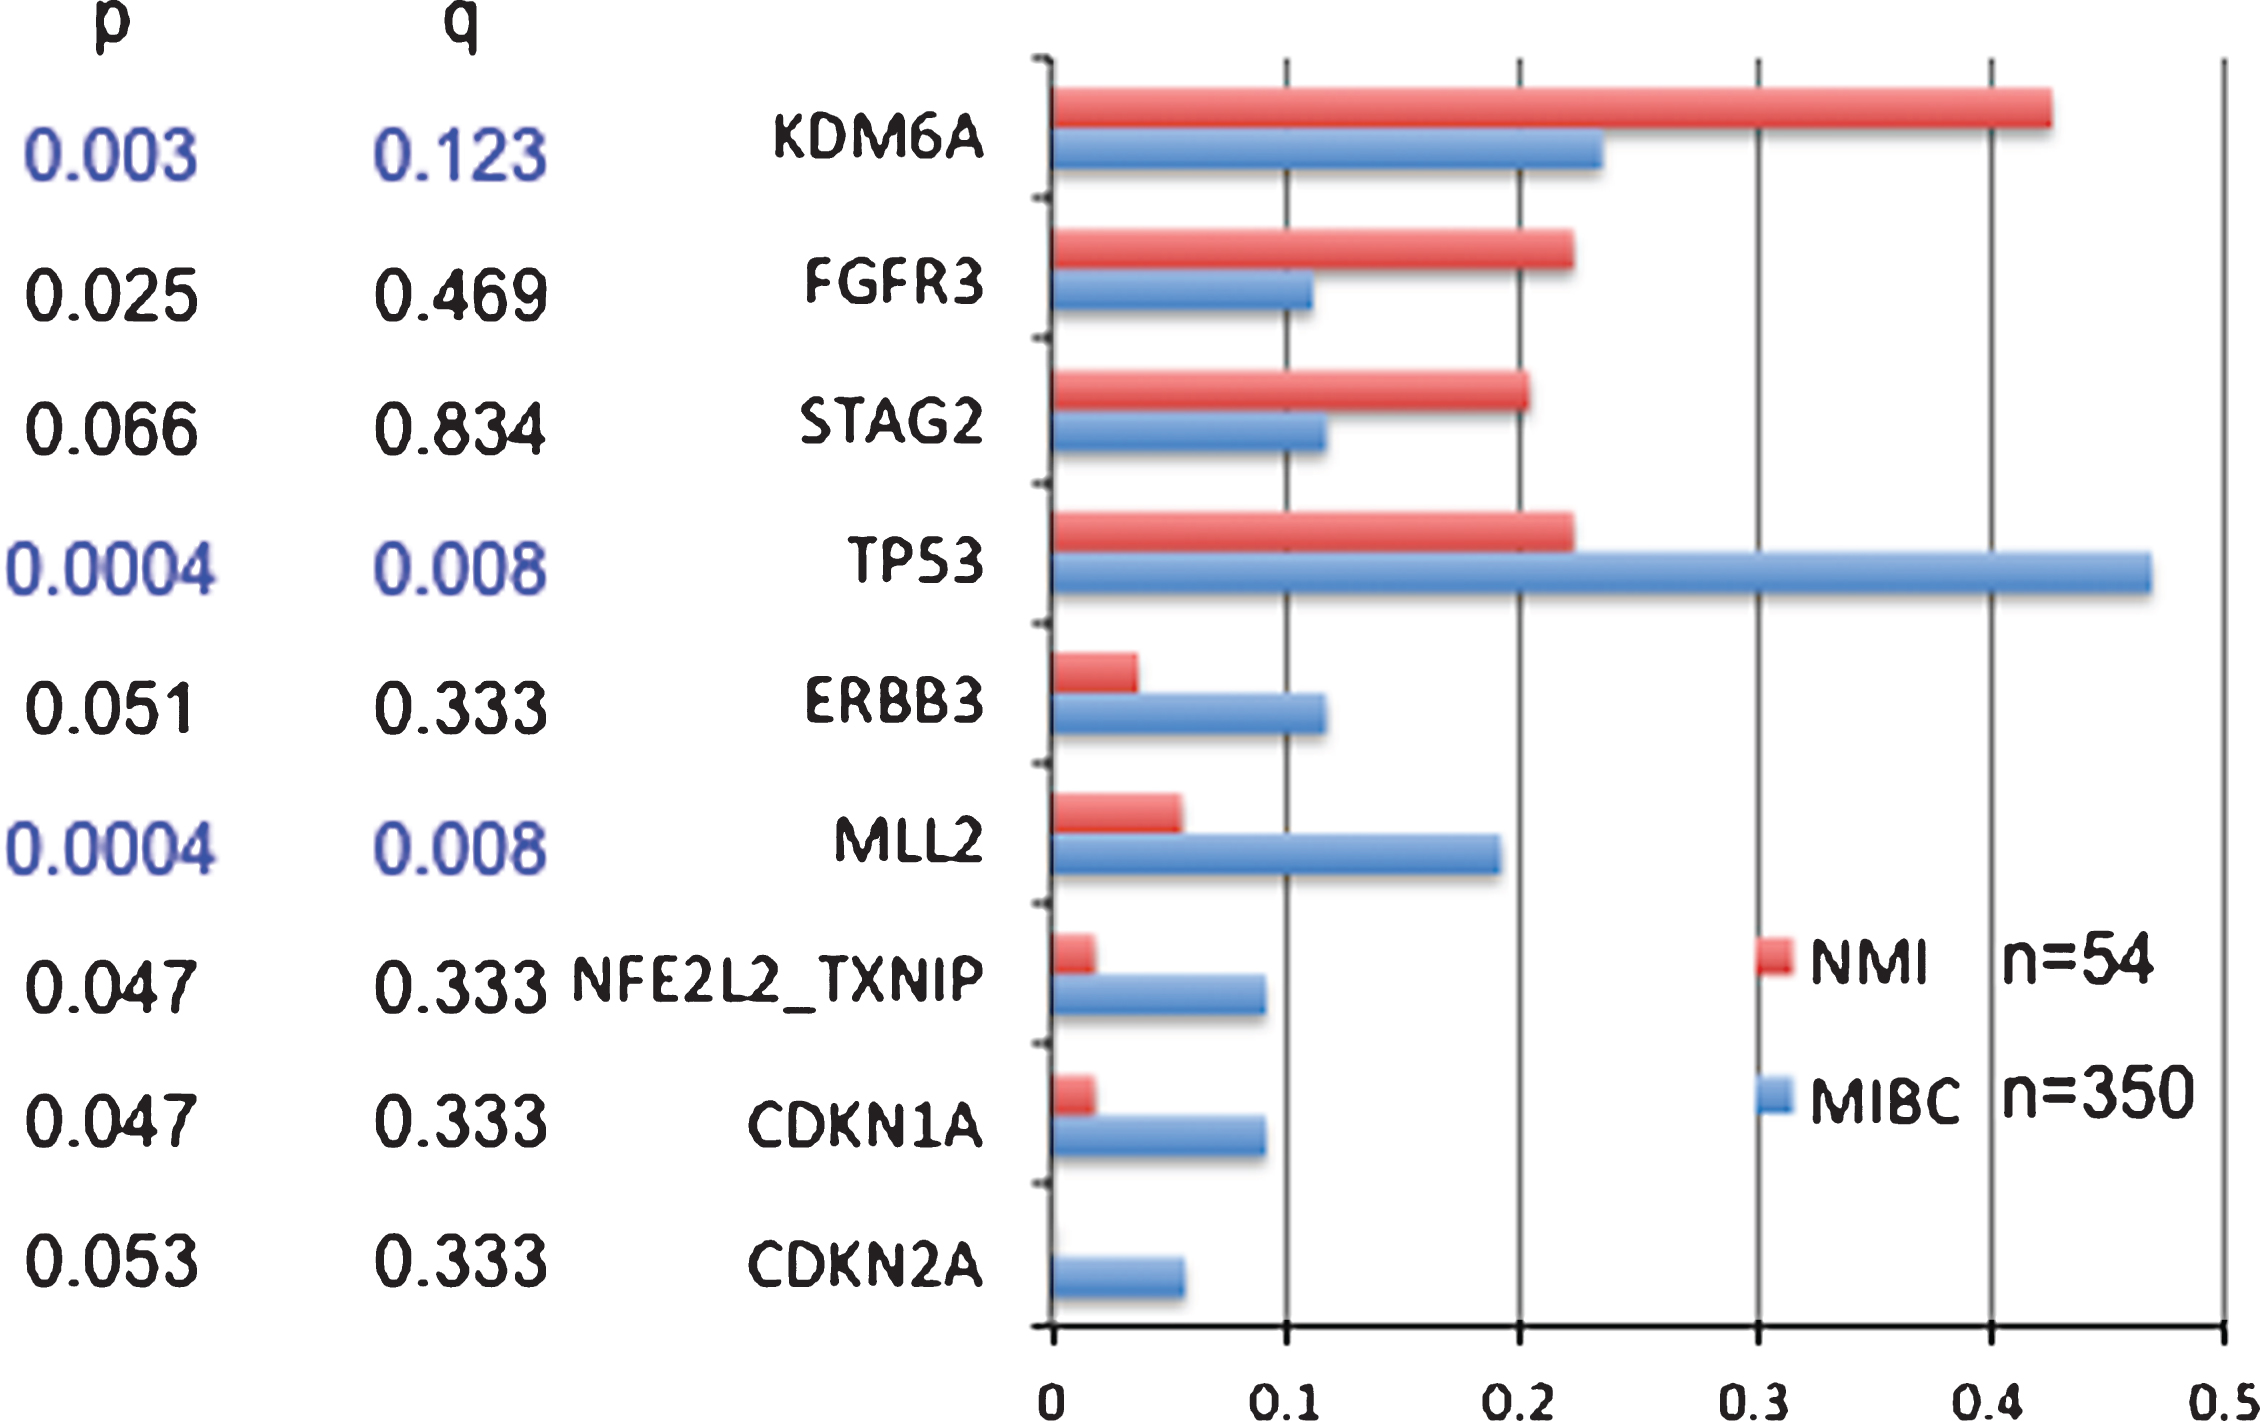 Comparison of mutation frequencies in non-muscle invasive (NMI) vs. muscle invasive bladder cancer (MIBC). Mutation frequencies are shown for genes for which there were some evidence for a difference in mutation frequency between NMI and MIBC. P is conventional p values by Fisher exact text; q is values after correction by FDR for multiple comparisons.